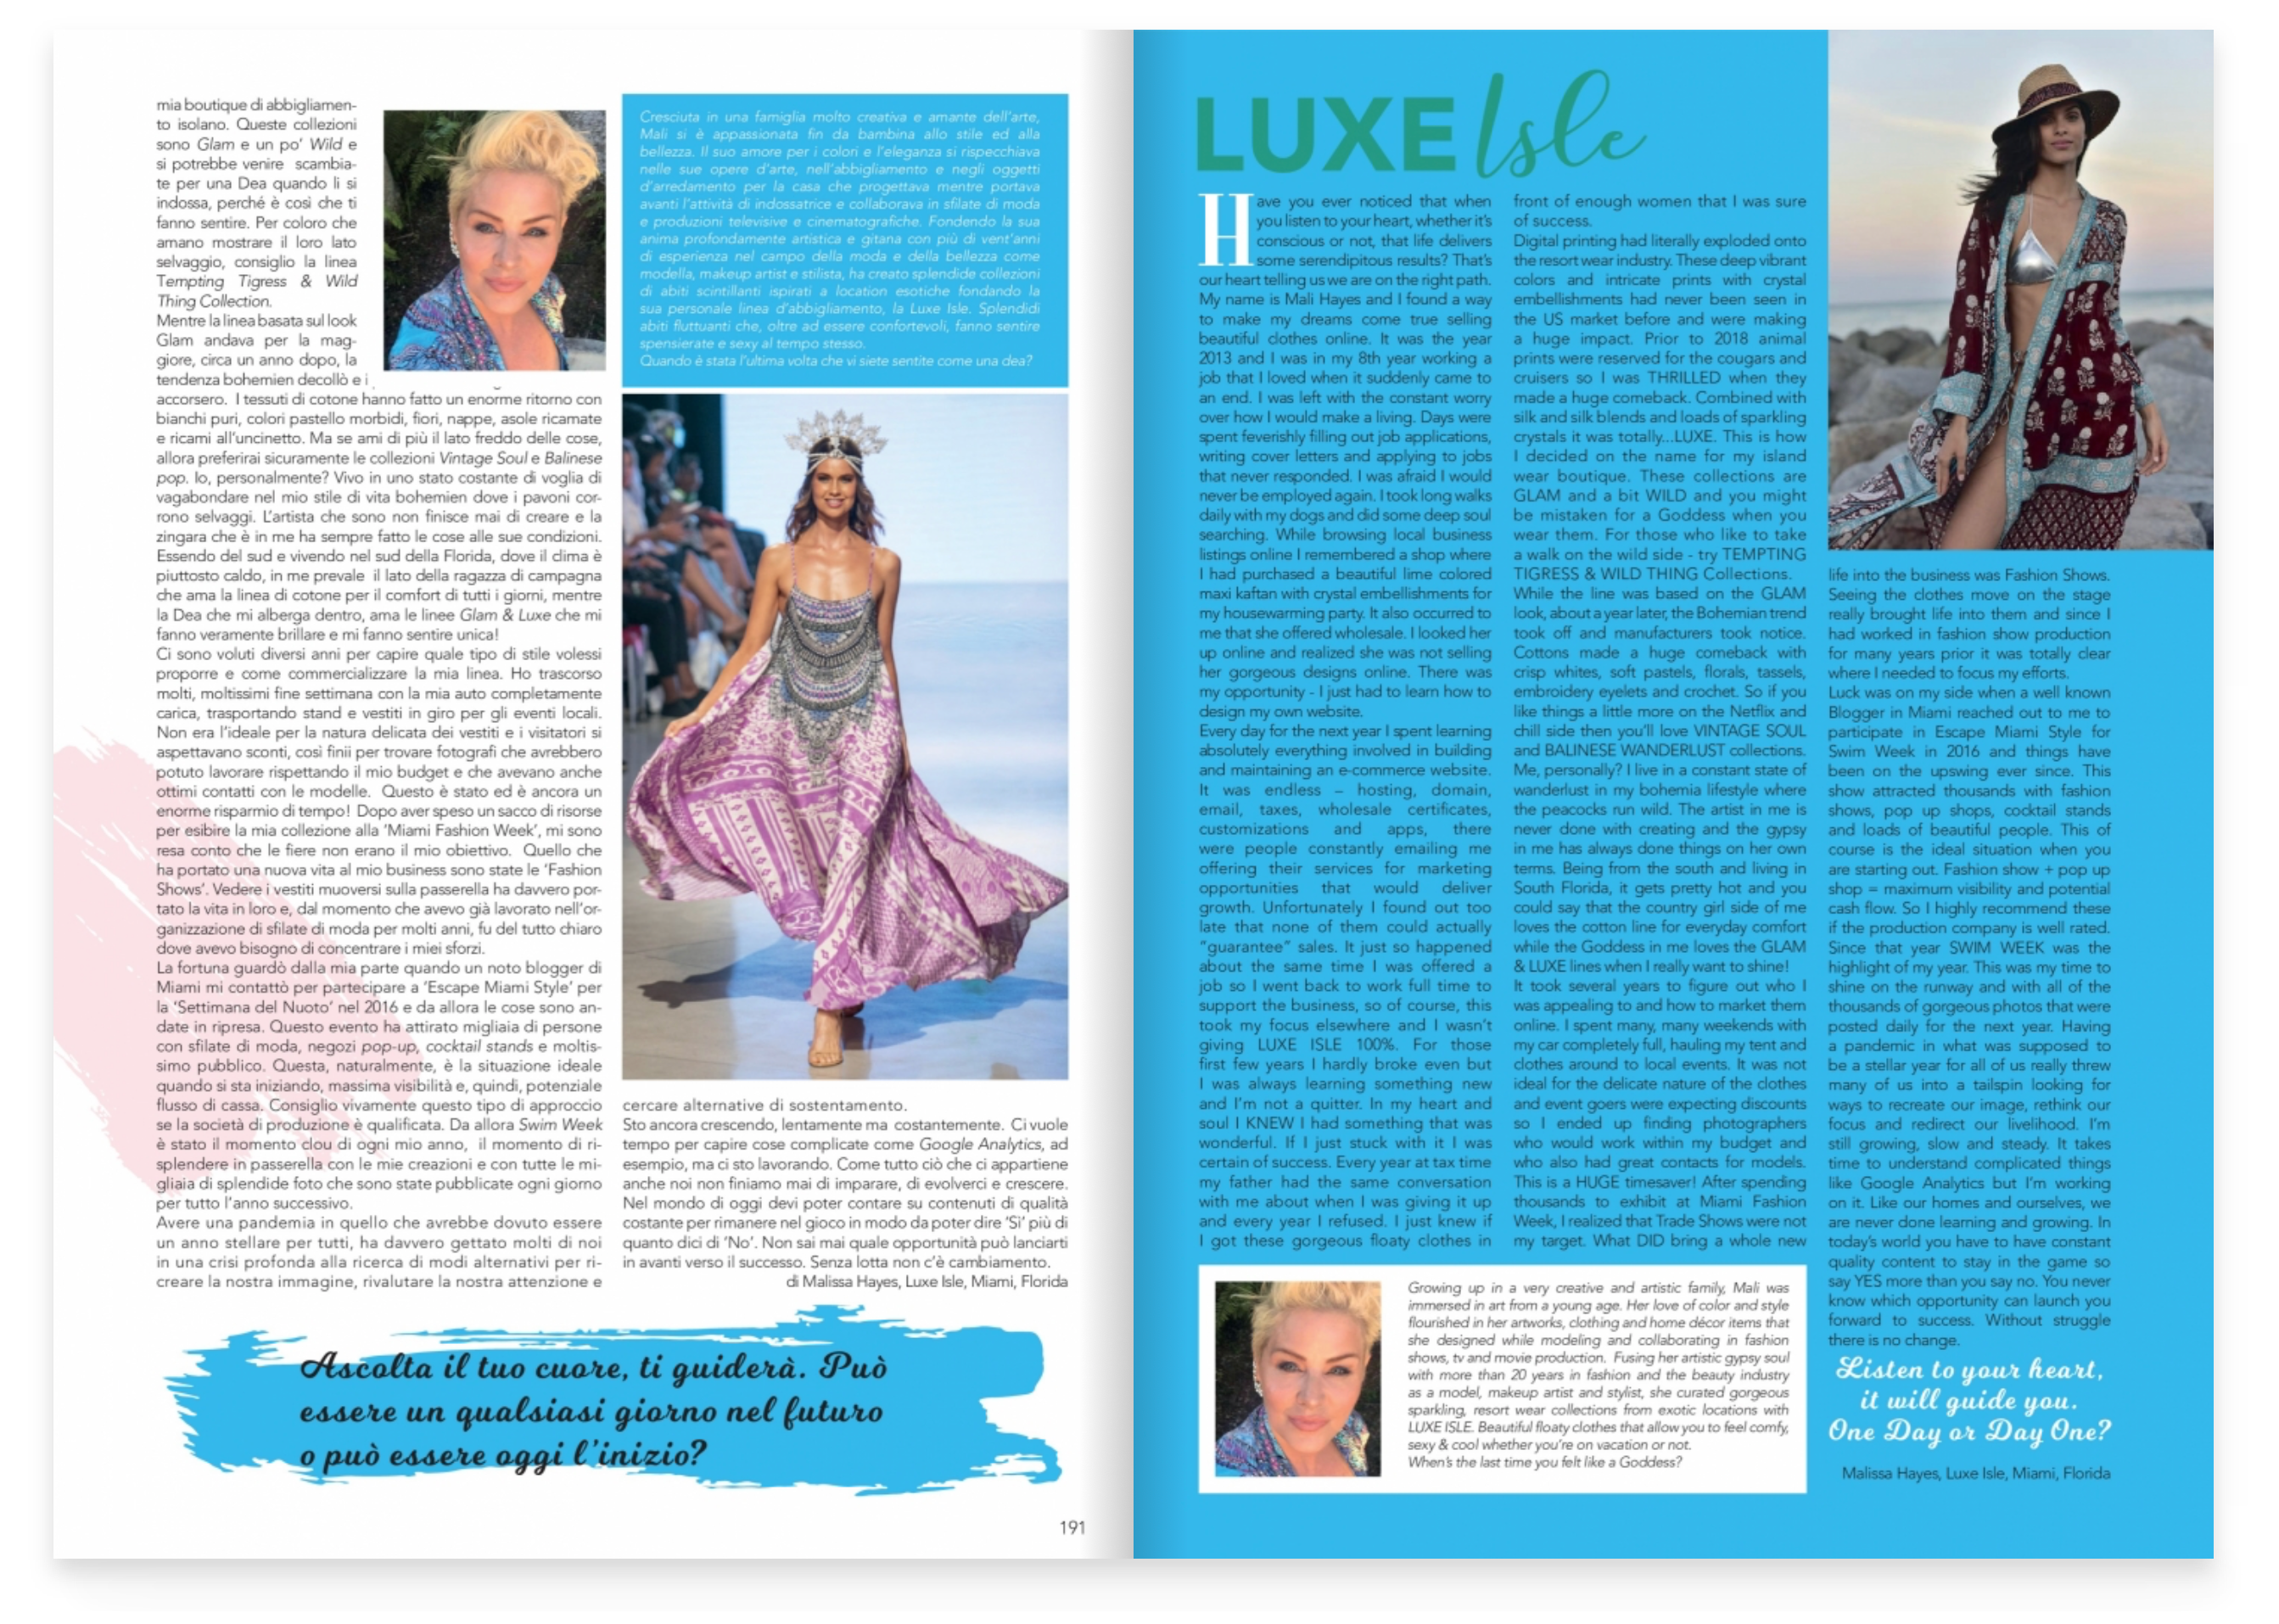 ESISTO Magazine features LUXE ISLE in their Premier Edition!